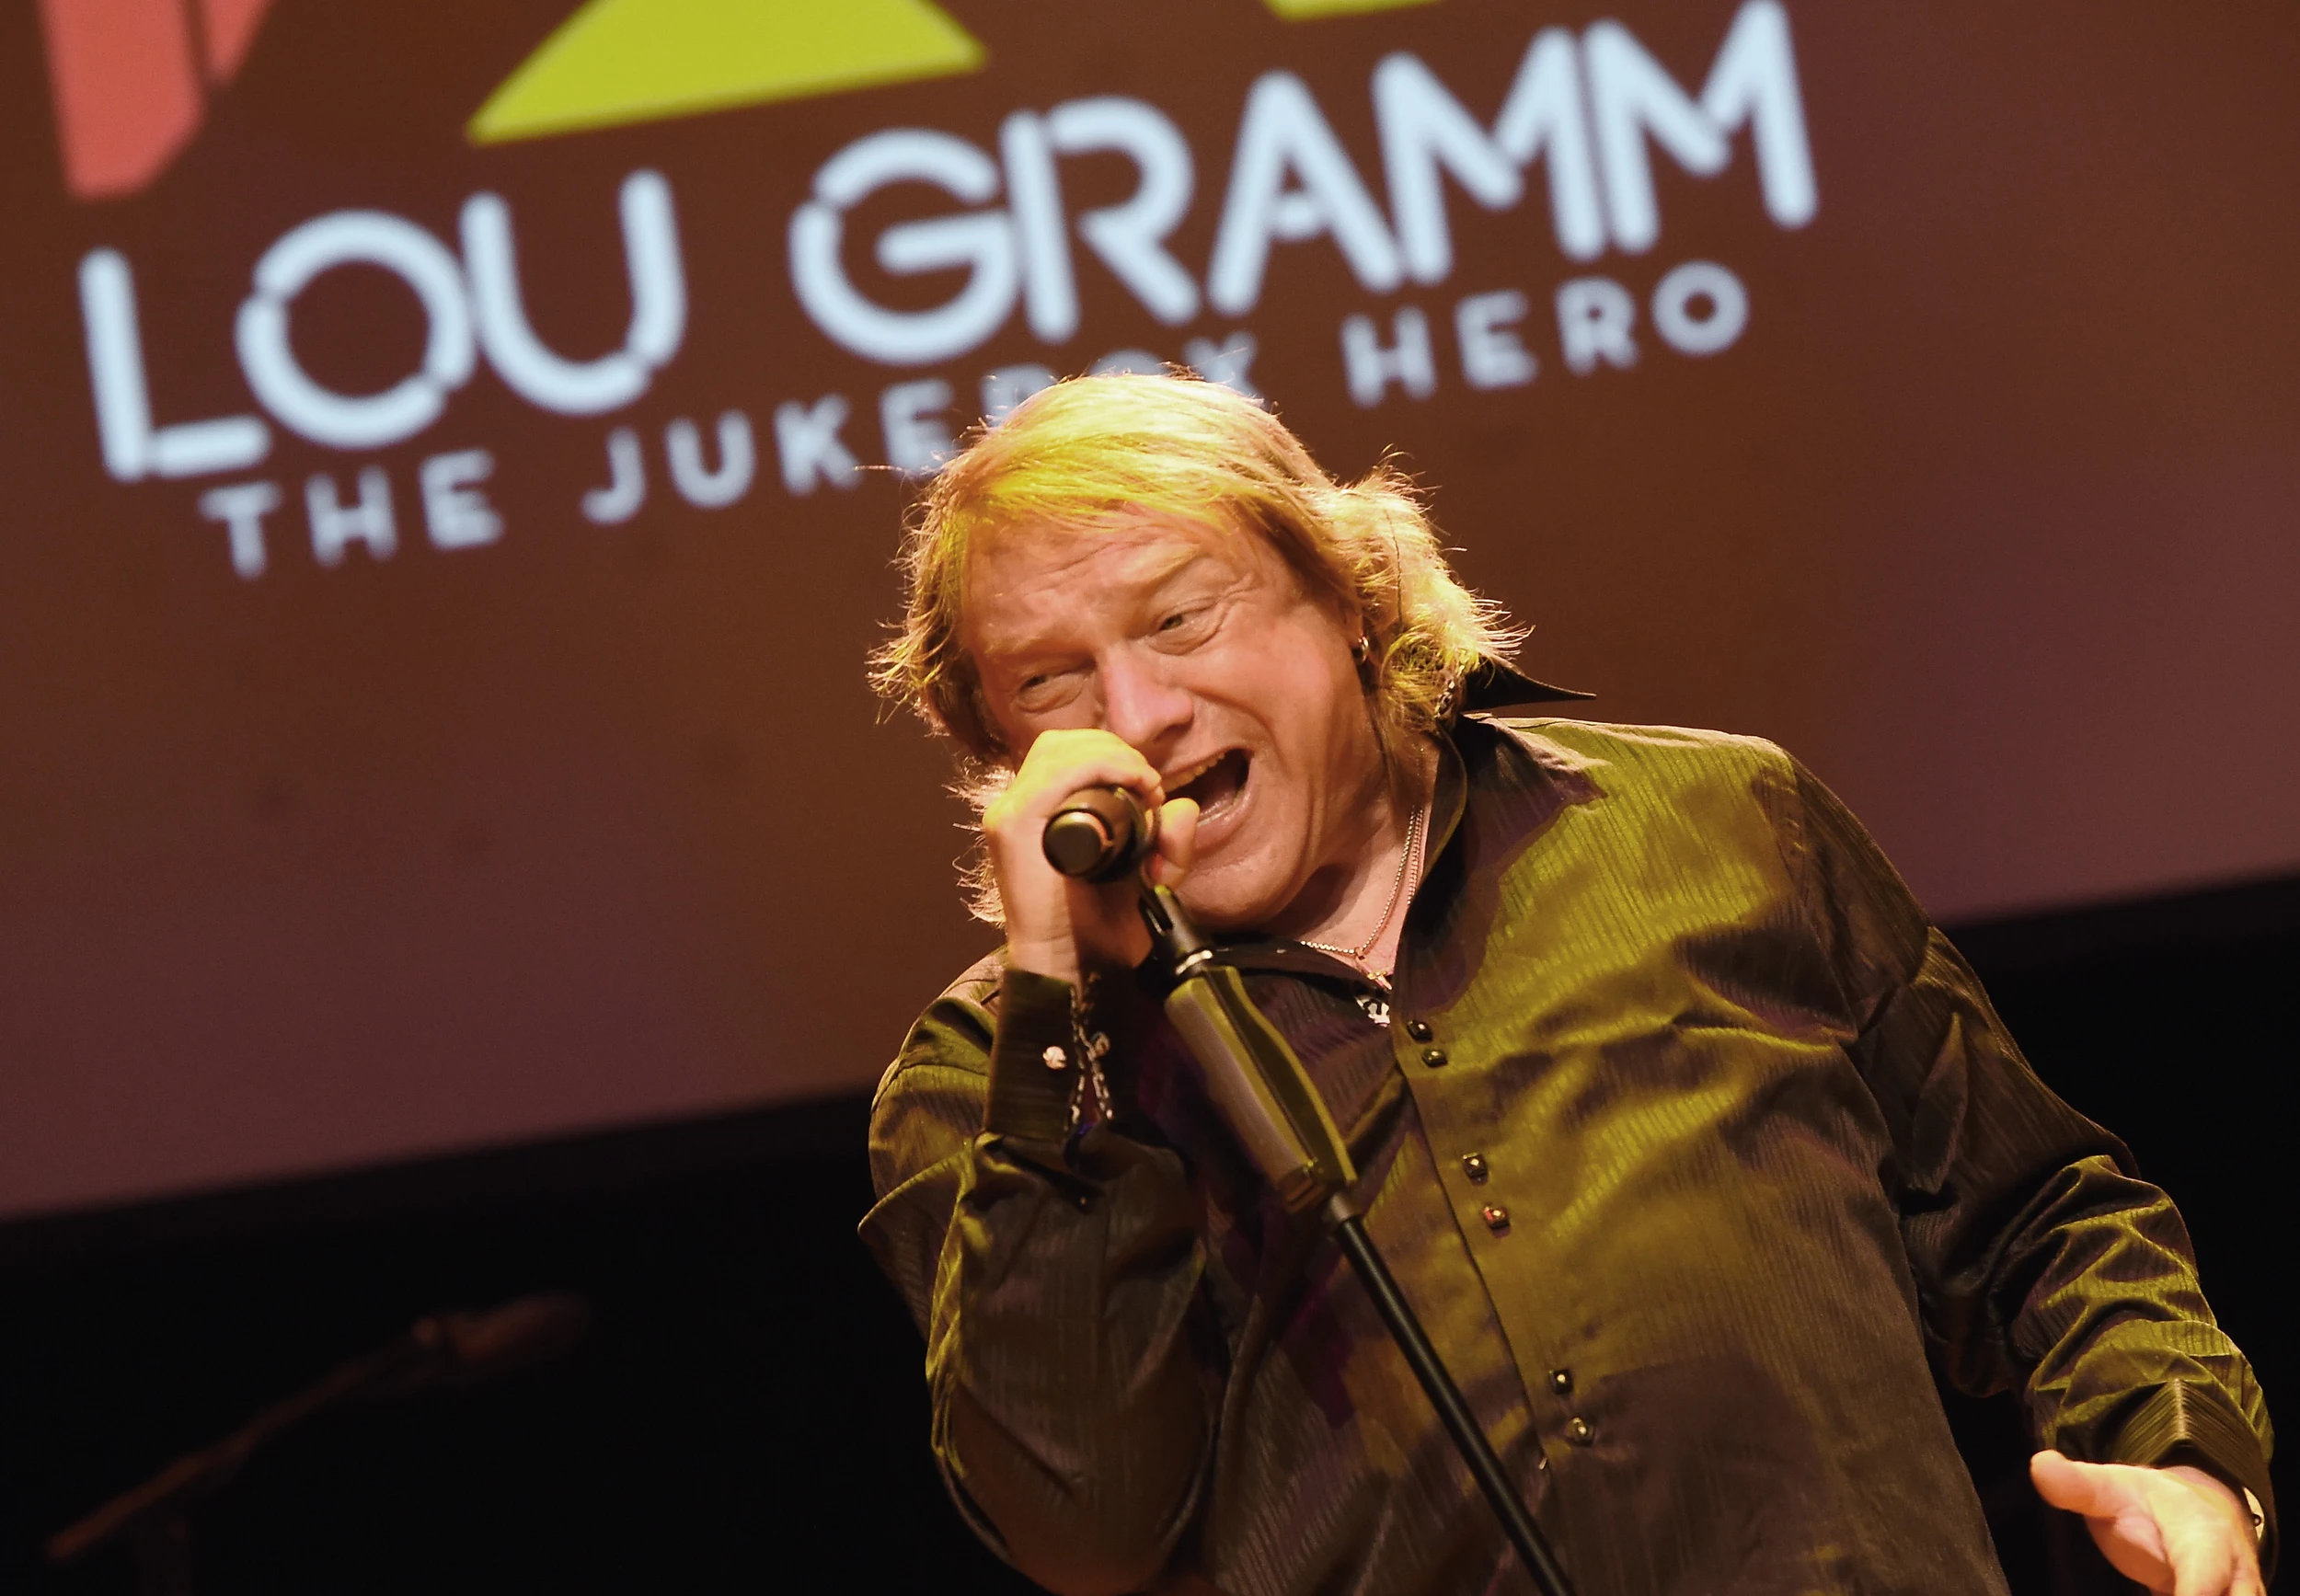 Why Lou Gramm Is Touring Again Exclusive Interview